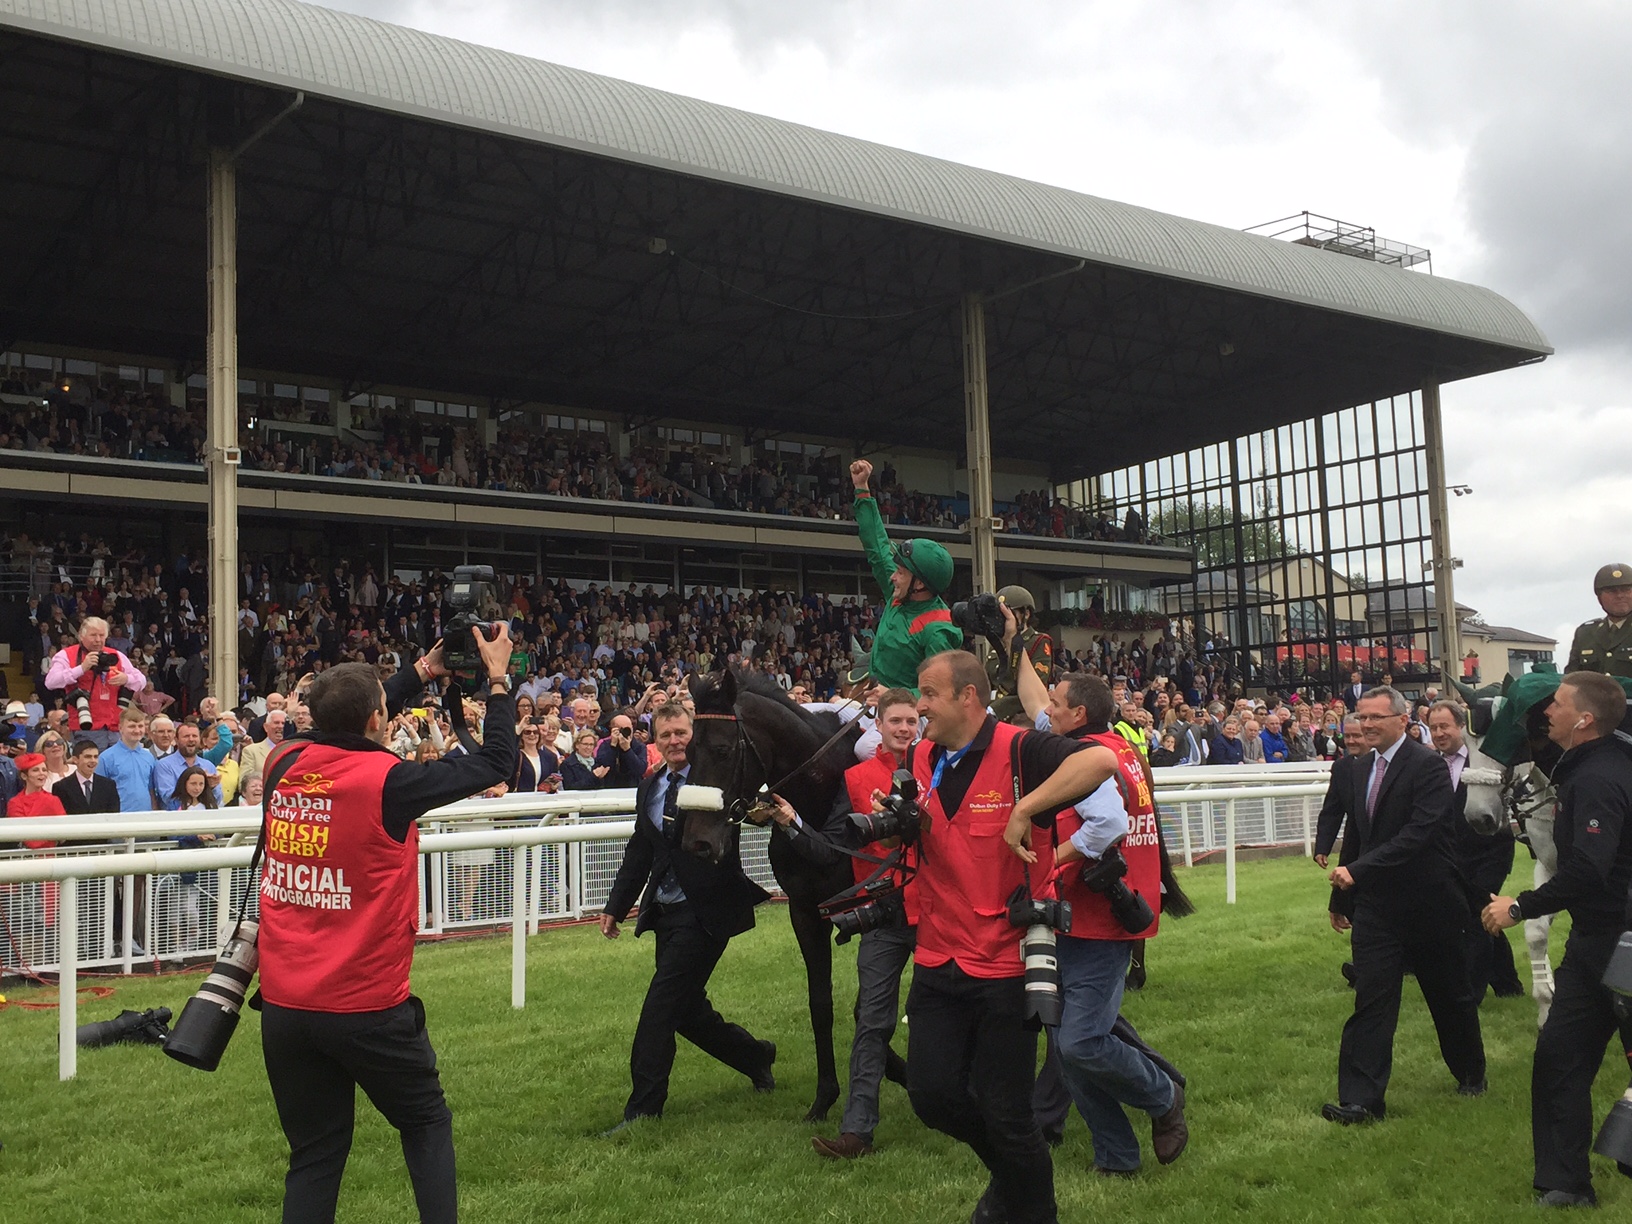 Moment of triumph: Harzand's jockey Pat Smullen takes the acclaim of the crowd at The Curragh racecourse